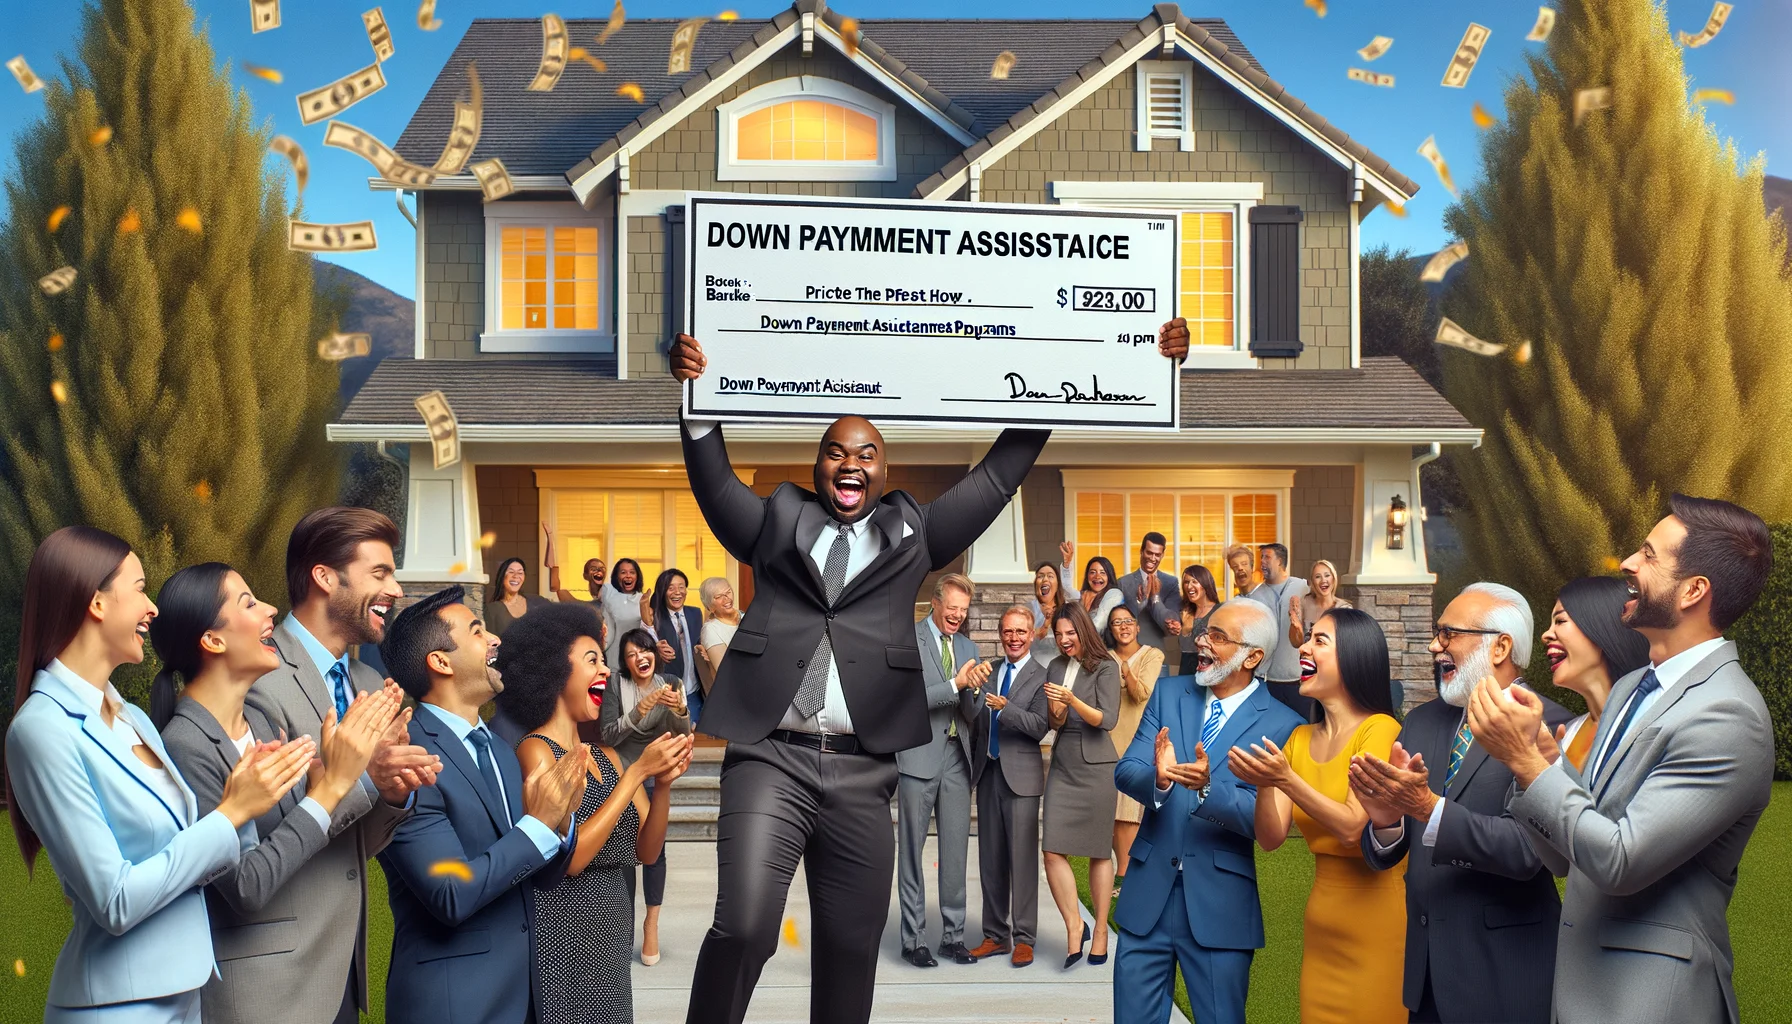 Create a humorous, realistic image representing the perfect scenario for down payment assistance programs. Picture this: A joyous Black man in a professional suit holding a giant symbolic check with the words 'Down Payment Assistance' written on it. He's standing in front of a charming suburban home with a 'Sold' sign in the yard. A group of enthusiastic South Asian bankers in business attire are shaking hands and applauding. In the background, a diverse crowd of Hispanic, White, and Middle-Eastern individuals is celebrating, with a few popping confetti poppers. The atmosphere exudes joy, relief, and a sense of achievement.